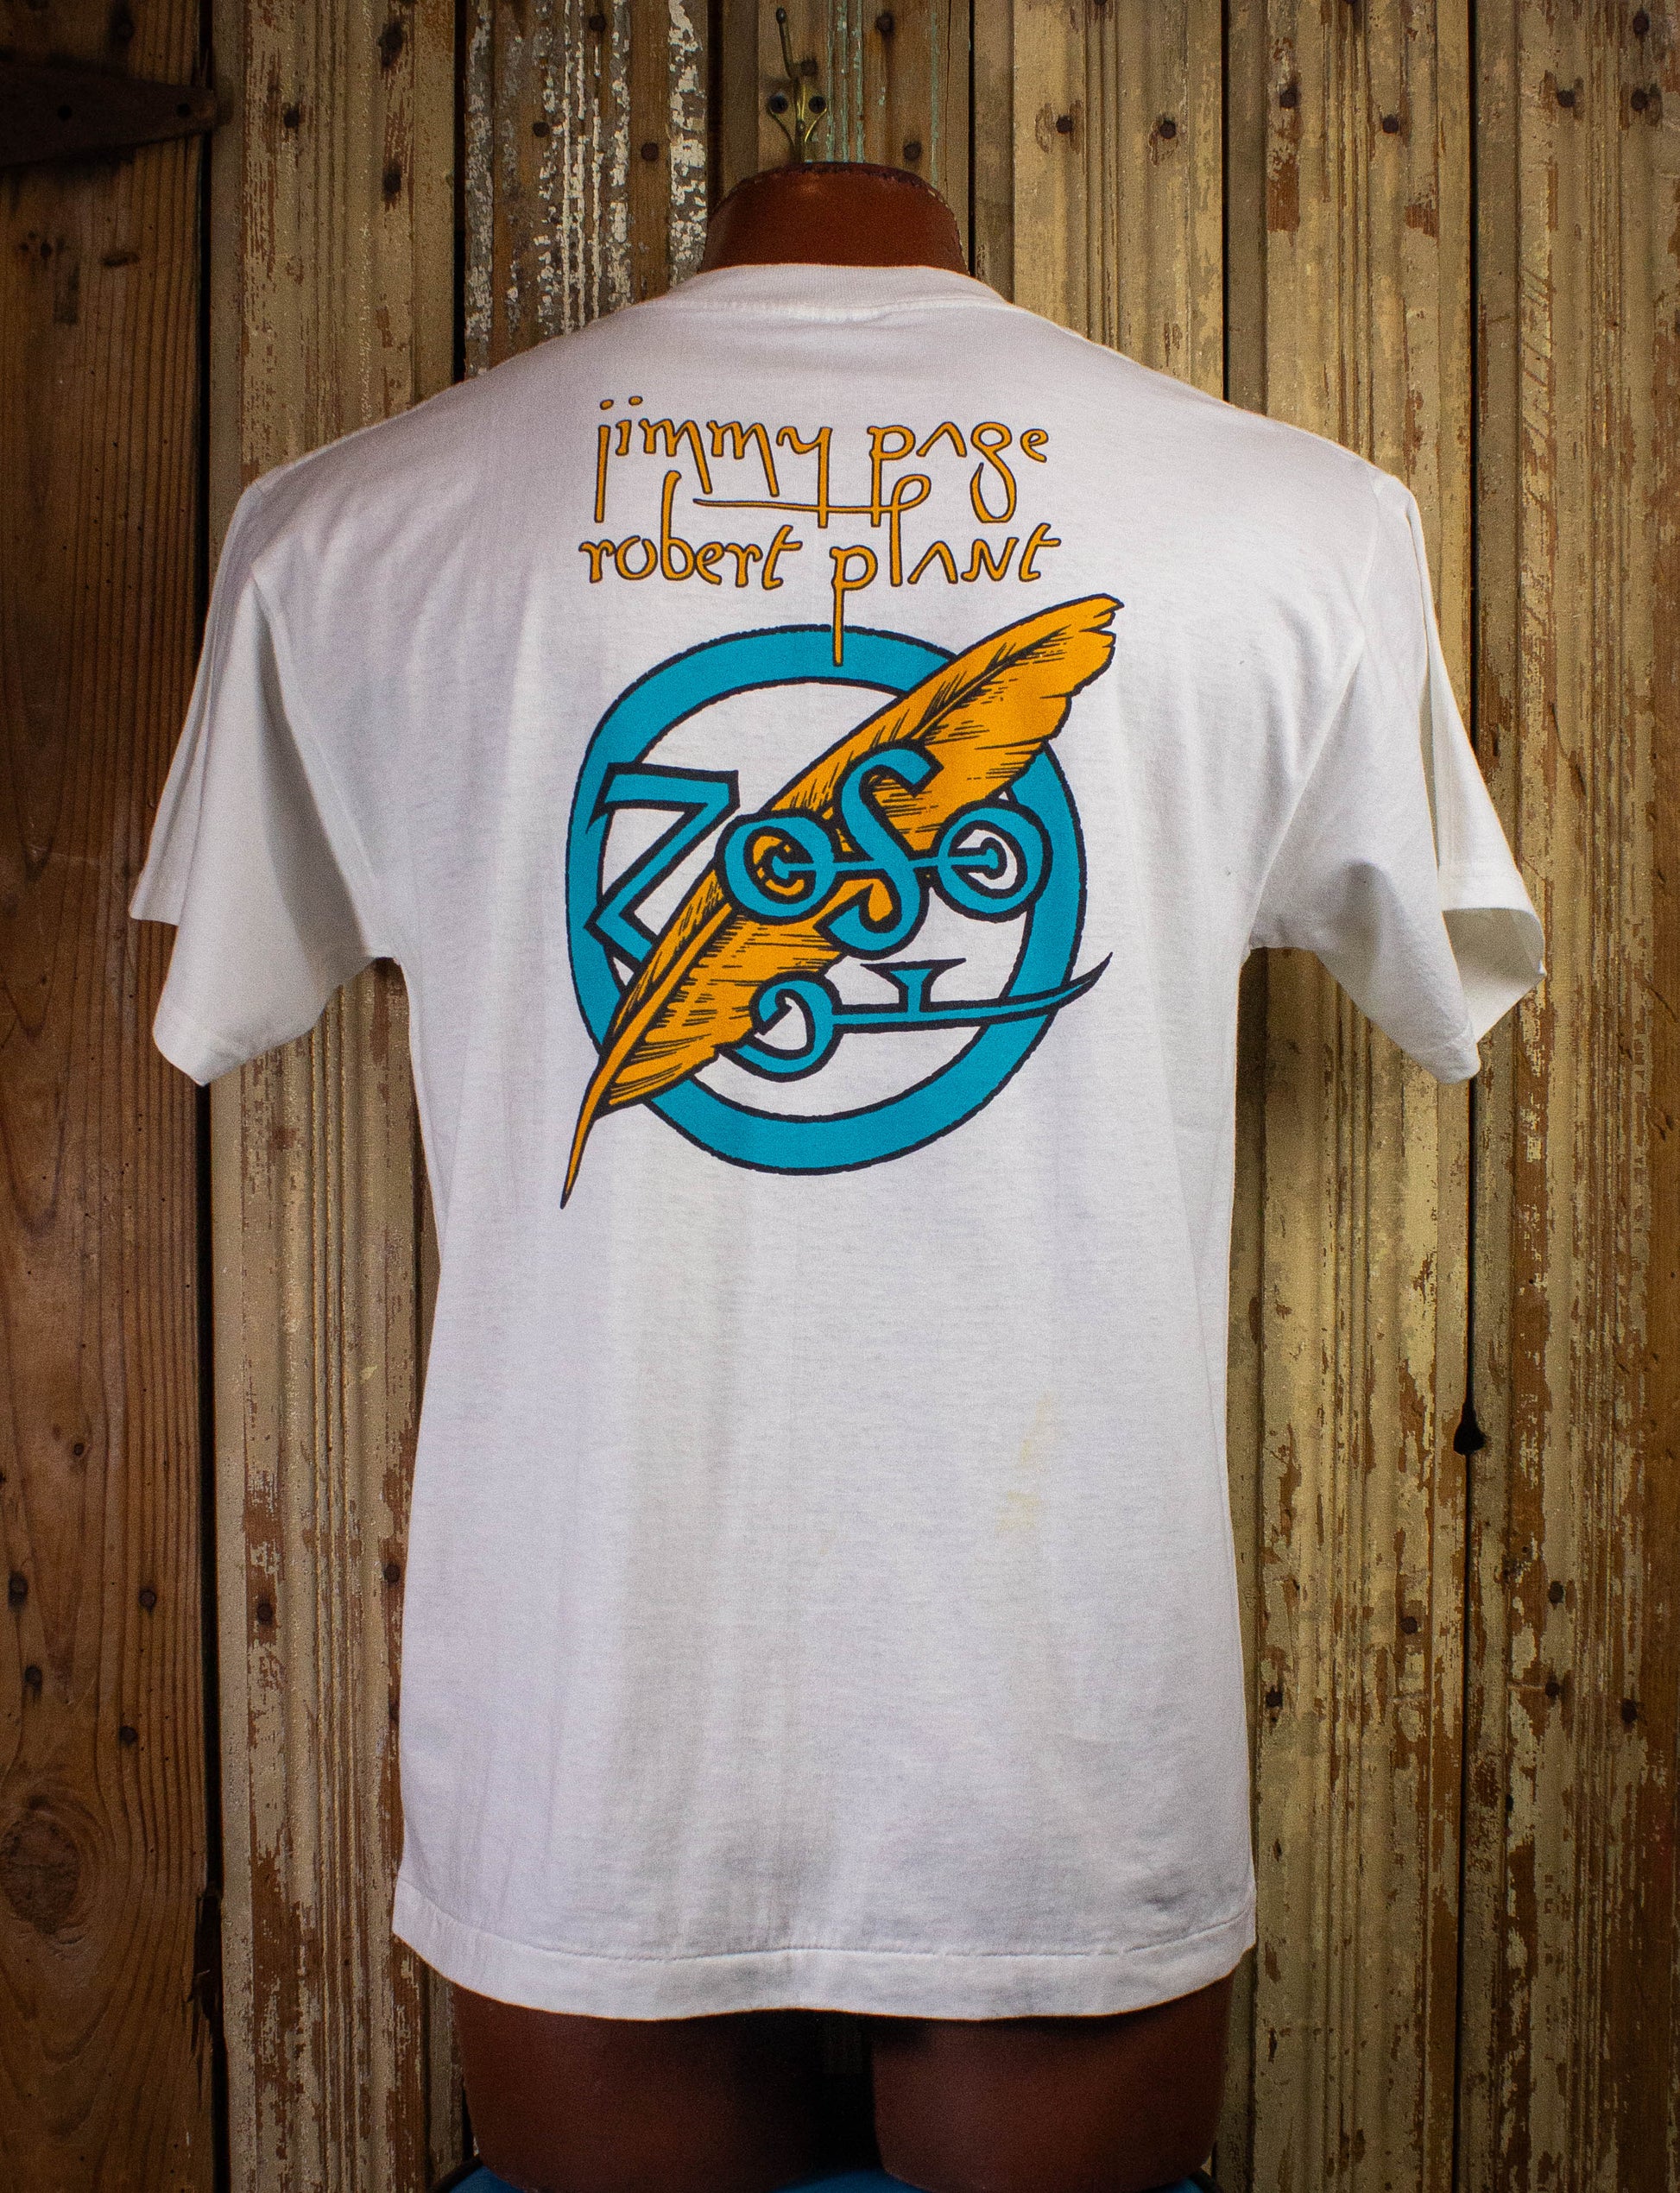 Vintage 1995 Jimmy Page and Robert Plant World Tour Concert T White Large